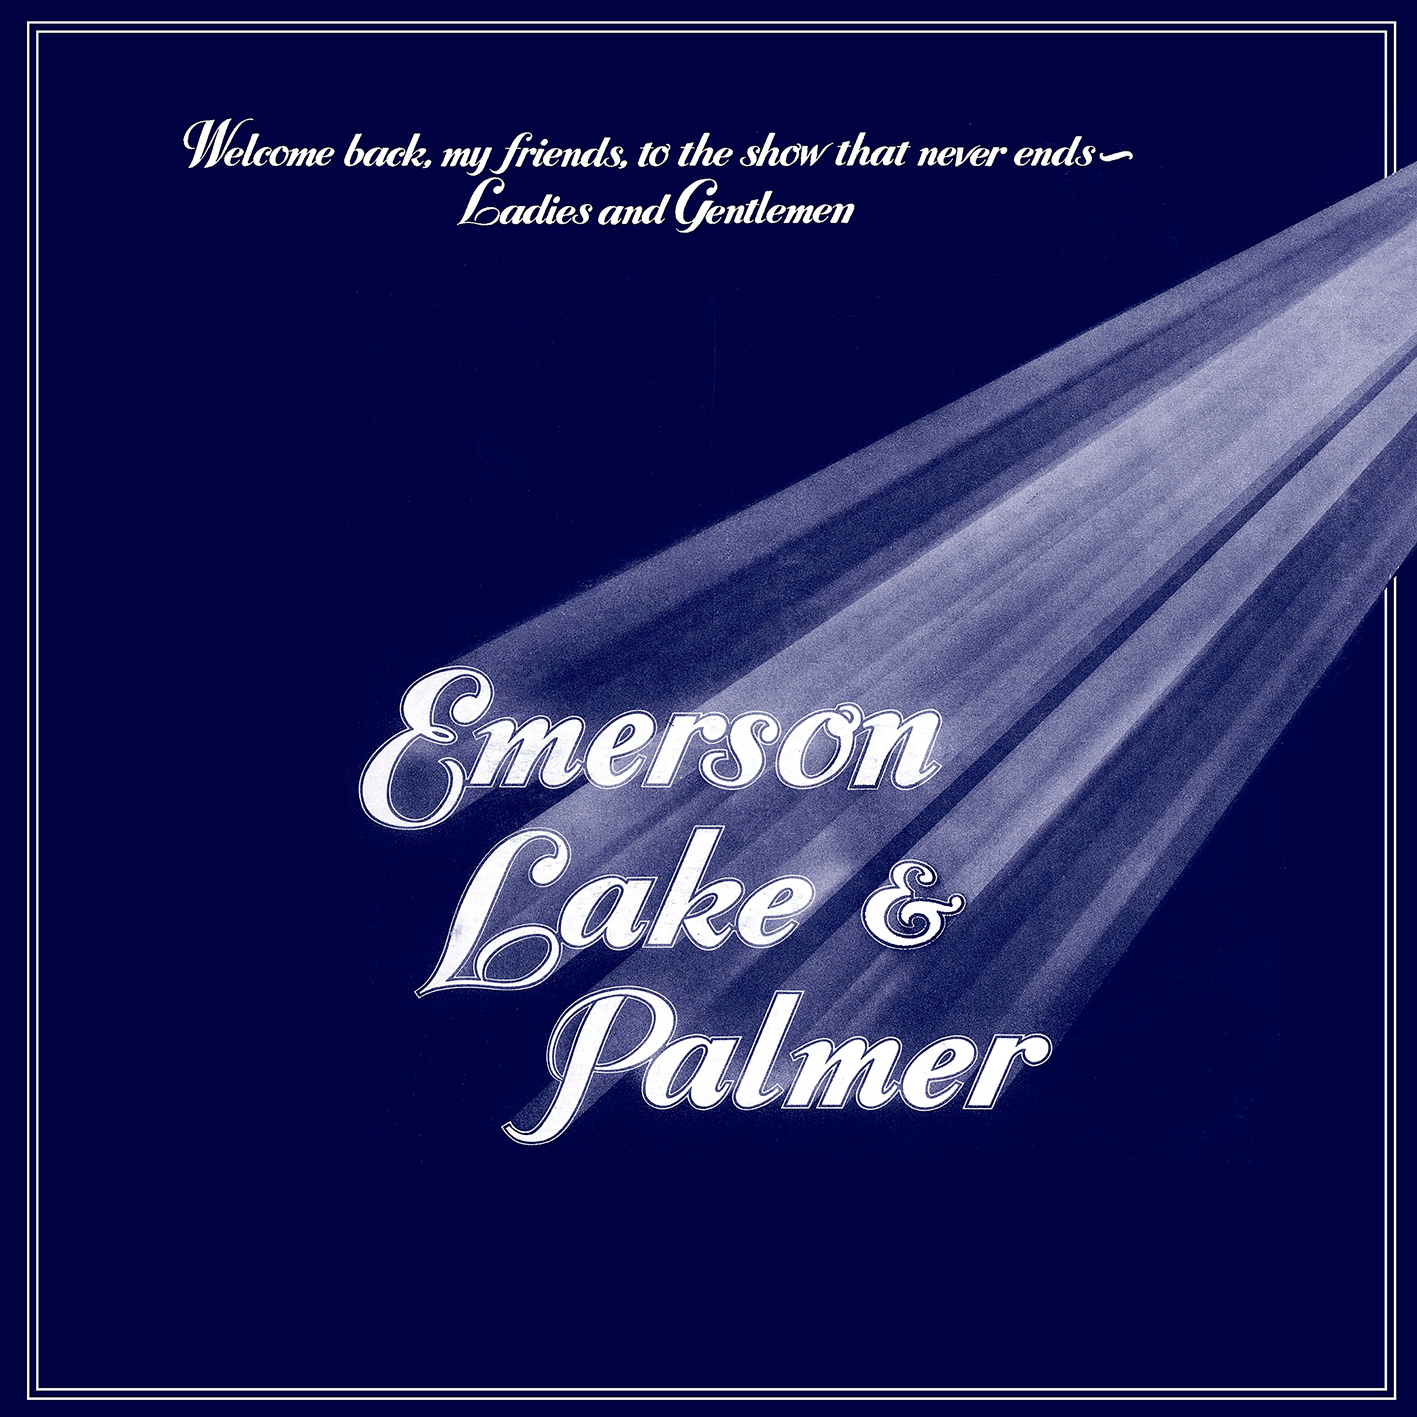 Emerson, Lake & Palmer – Welcome Back My Friends To The Show That Never Ends (1974/2016) [HDTracks FLAC 24bit/96kHz]